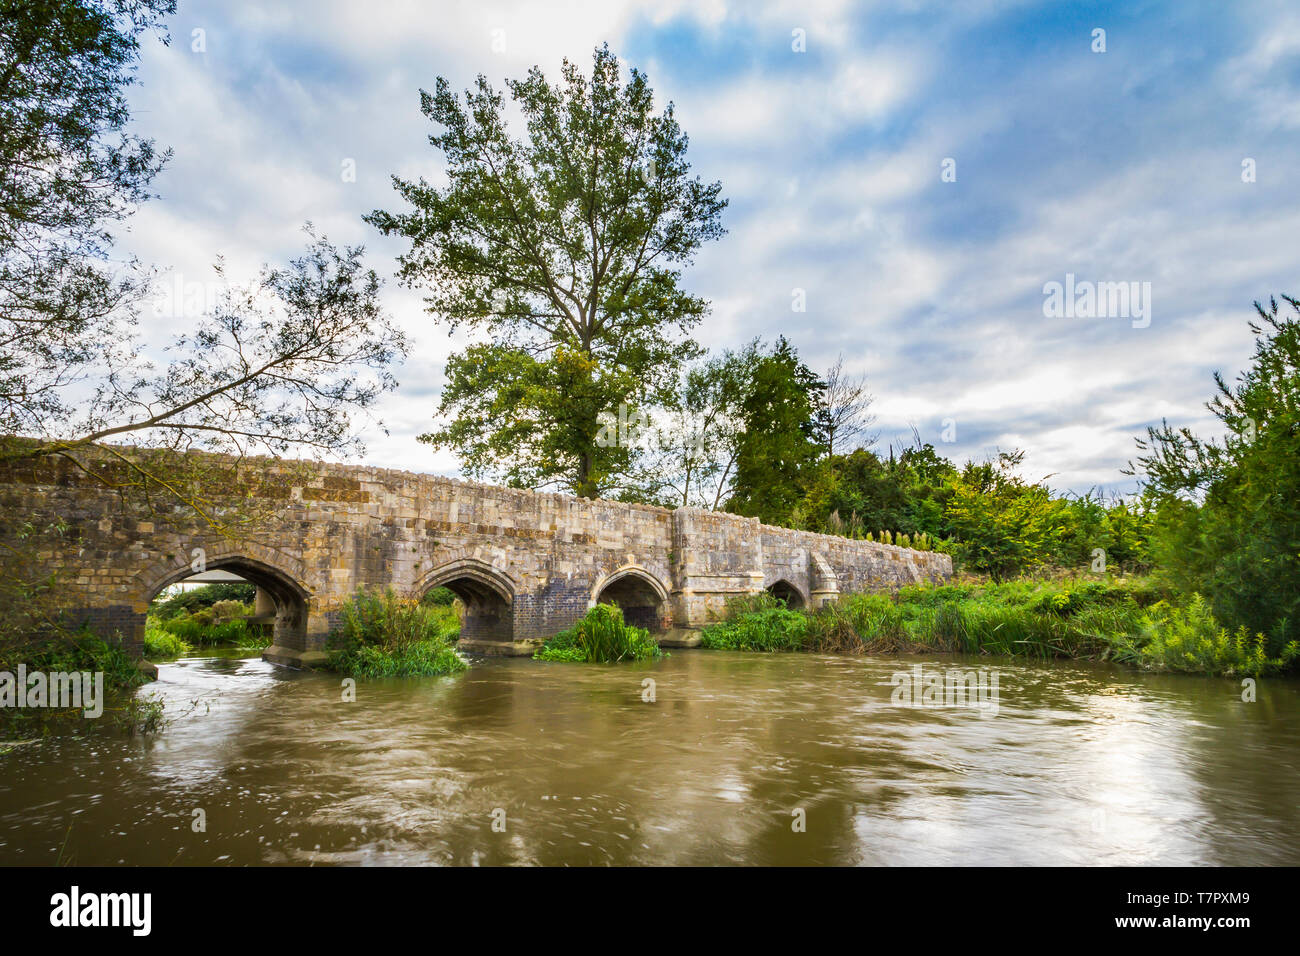 Old stone medival bridge over a streaming river in England. Dramatic cloudscape and old color tones Stock Photo